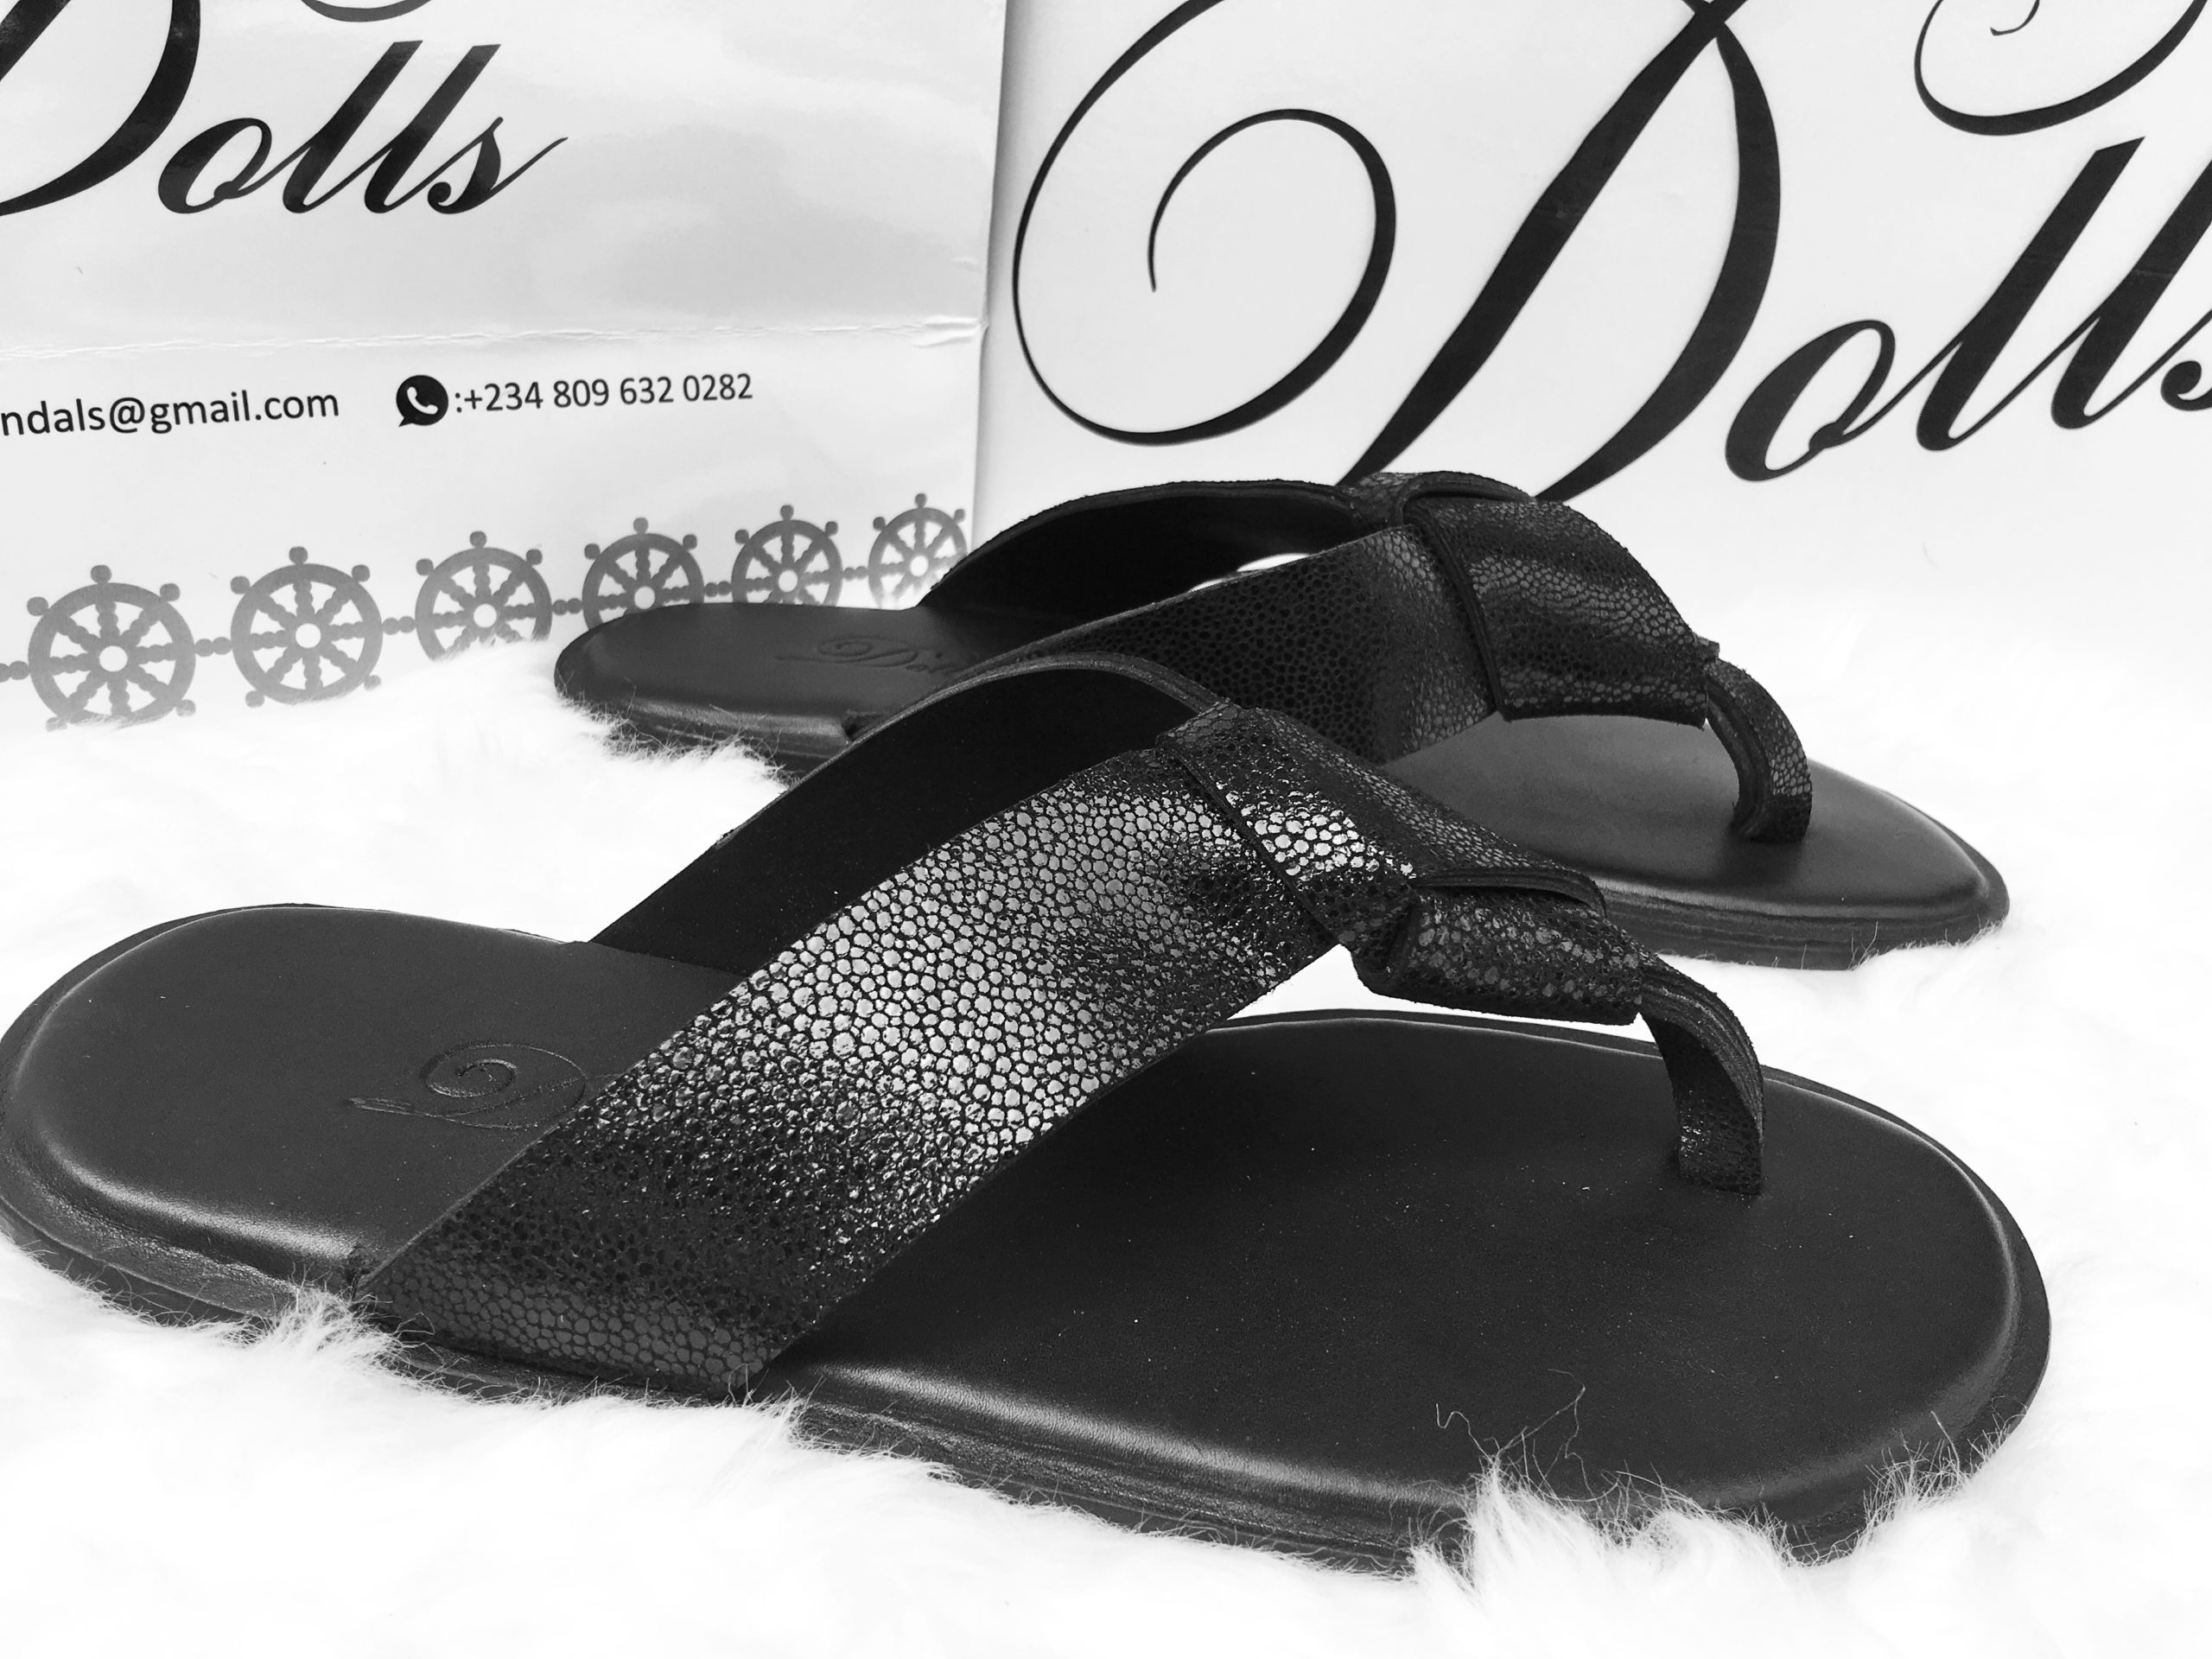 picture of an embossed leather sandal for men by Dolls leather products